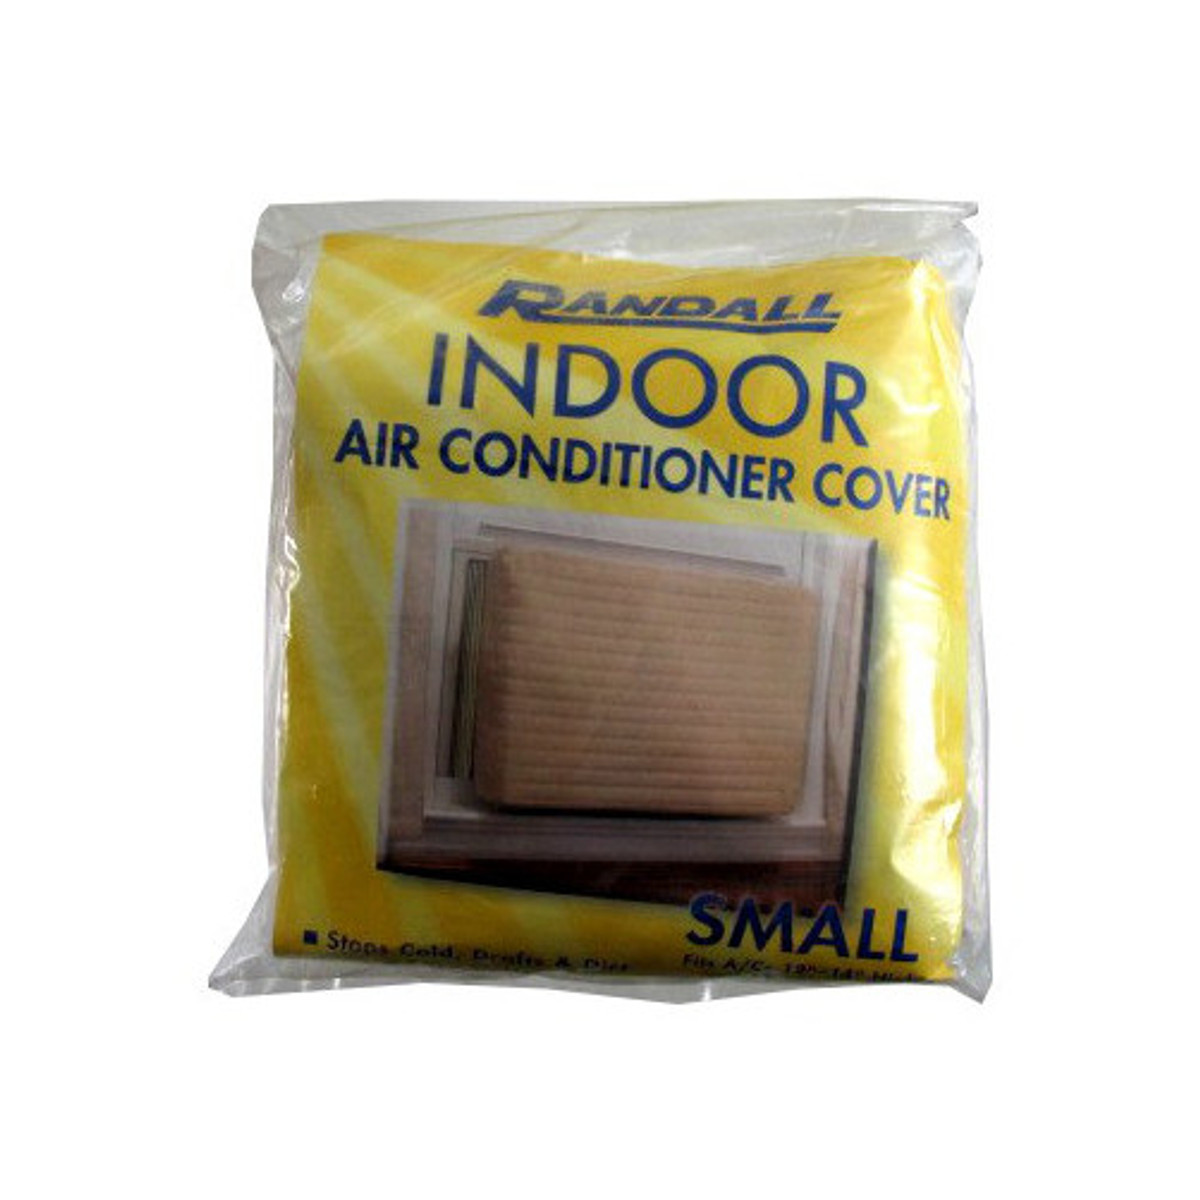 small indoor air conditioner cover